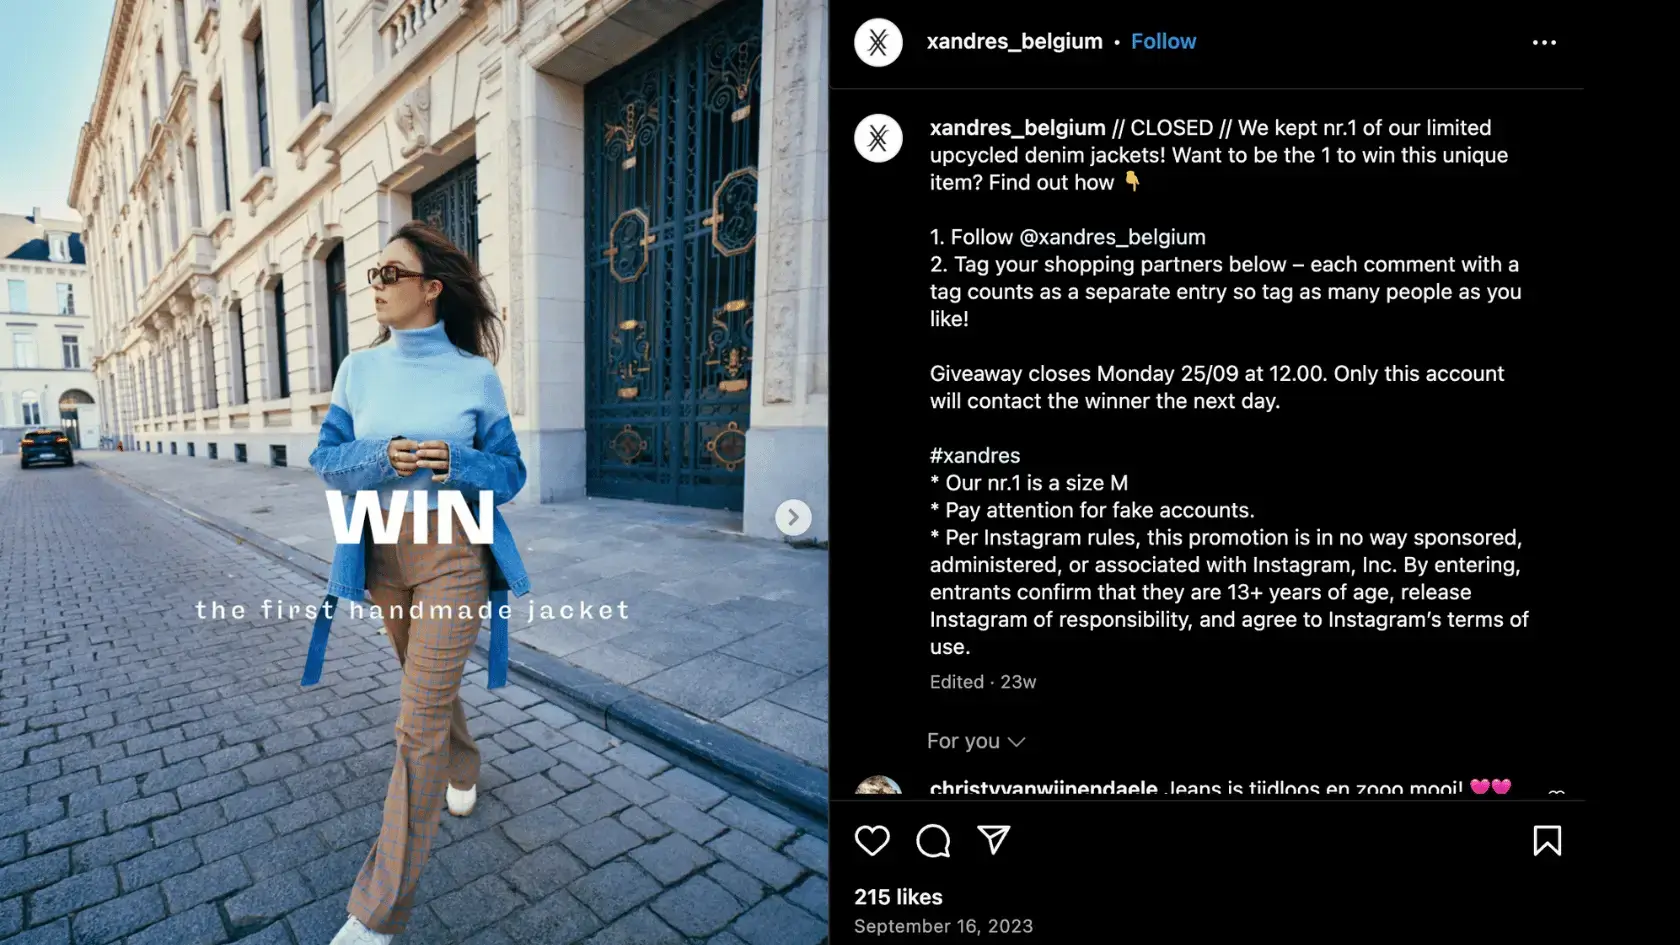 Marketing on Instagram: How to Convert Followers Into Customers